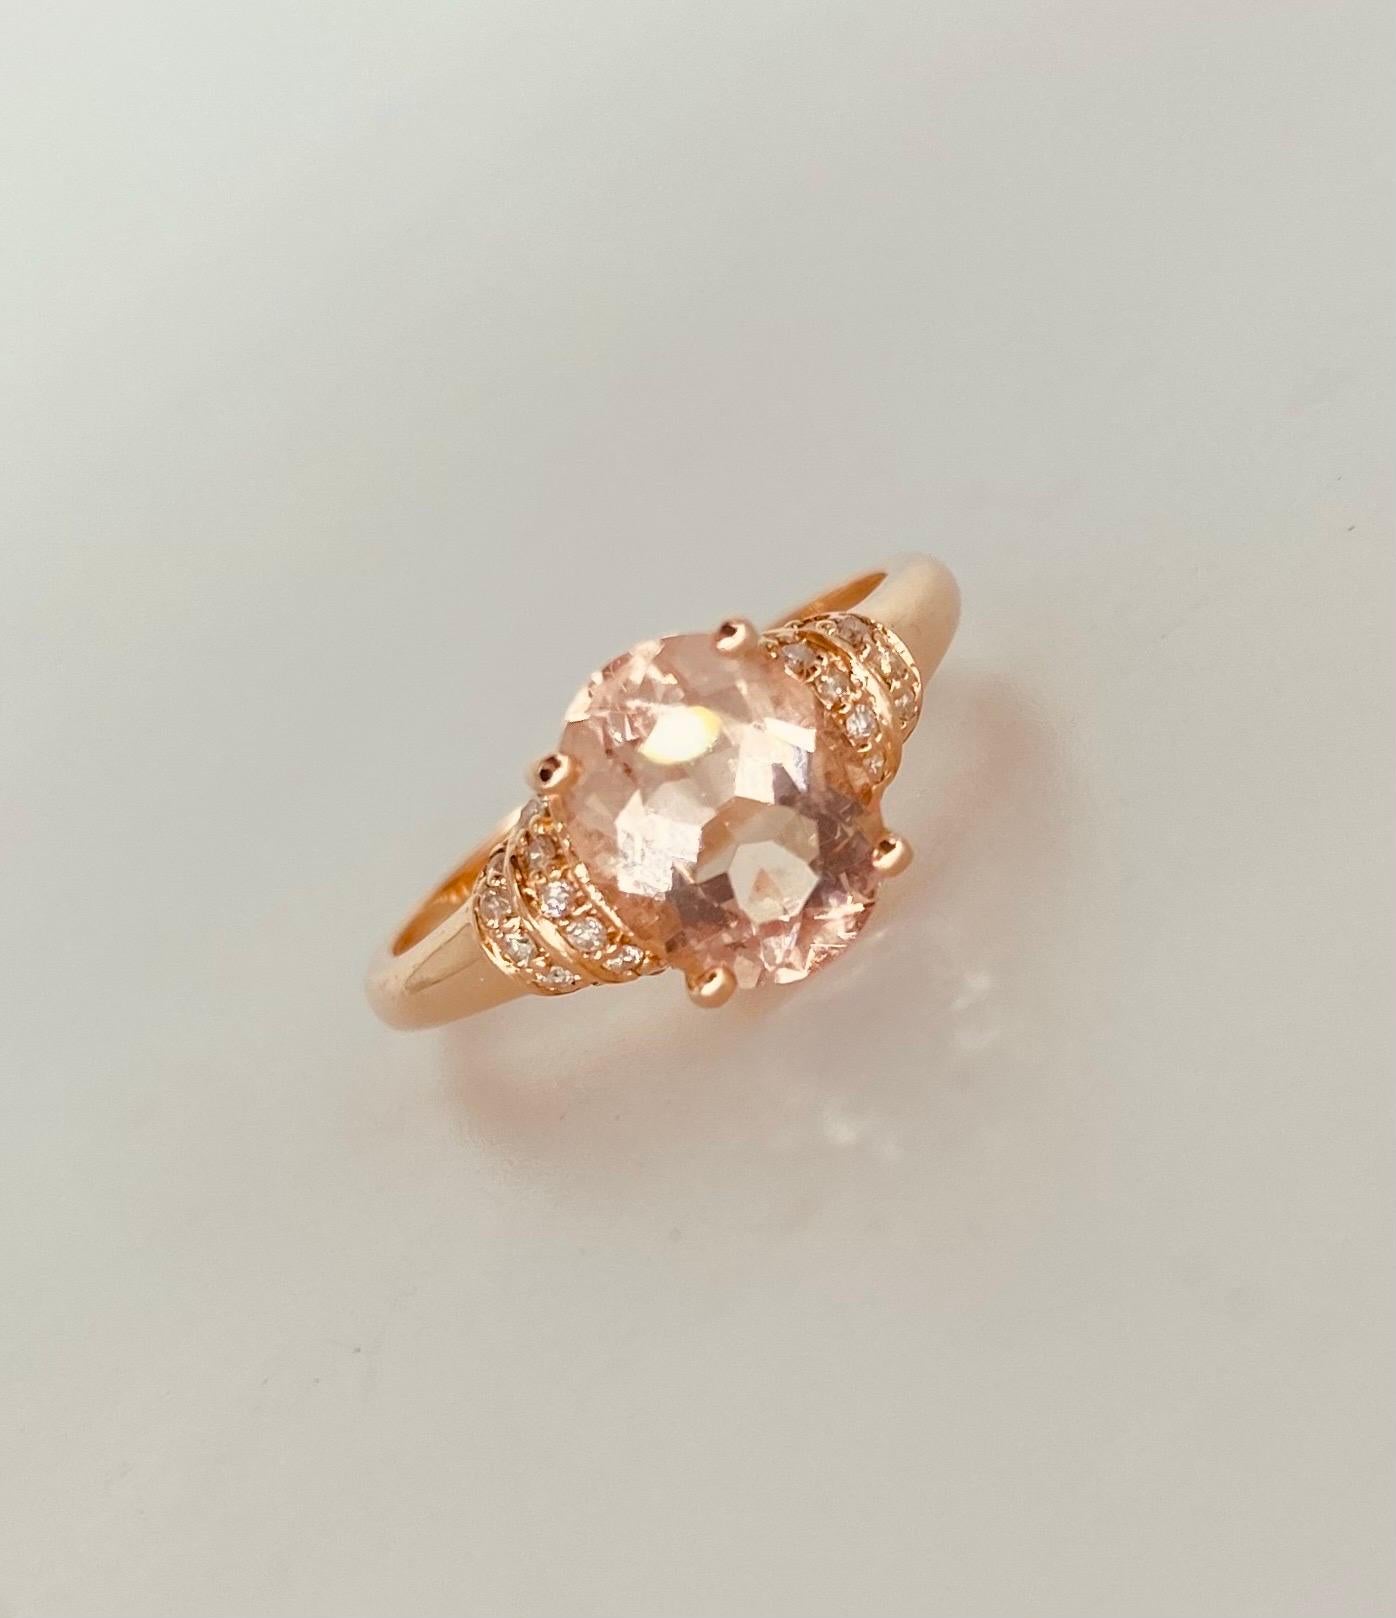 Designer 1.86 Carat Tourmaline and Diamonds Engagement Ring 14k Rose Gold In Excellent Condition For Sale In Miami, FL